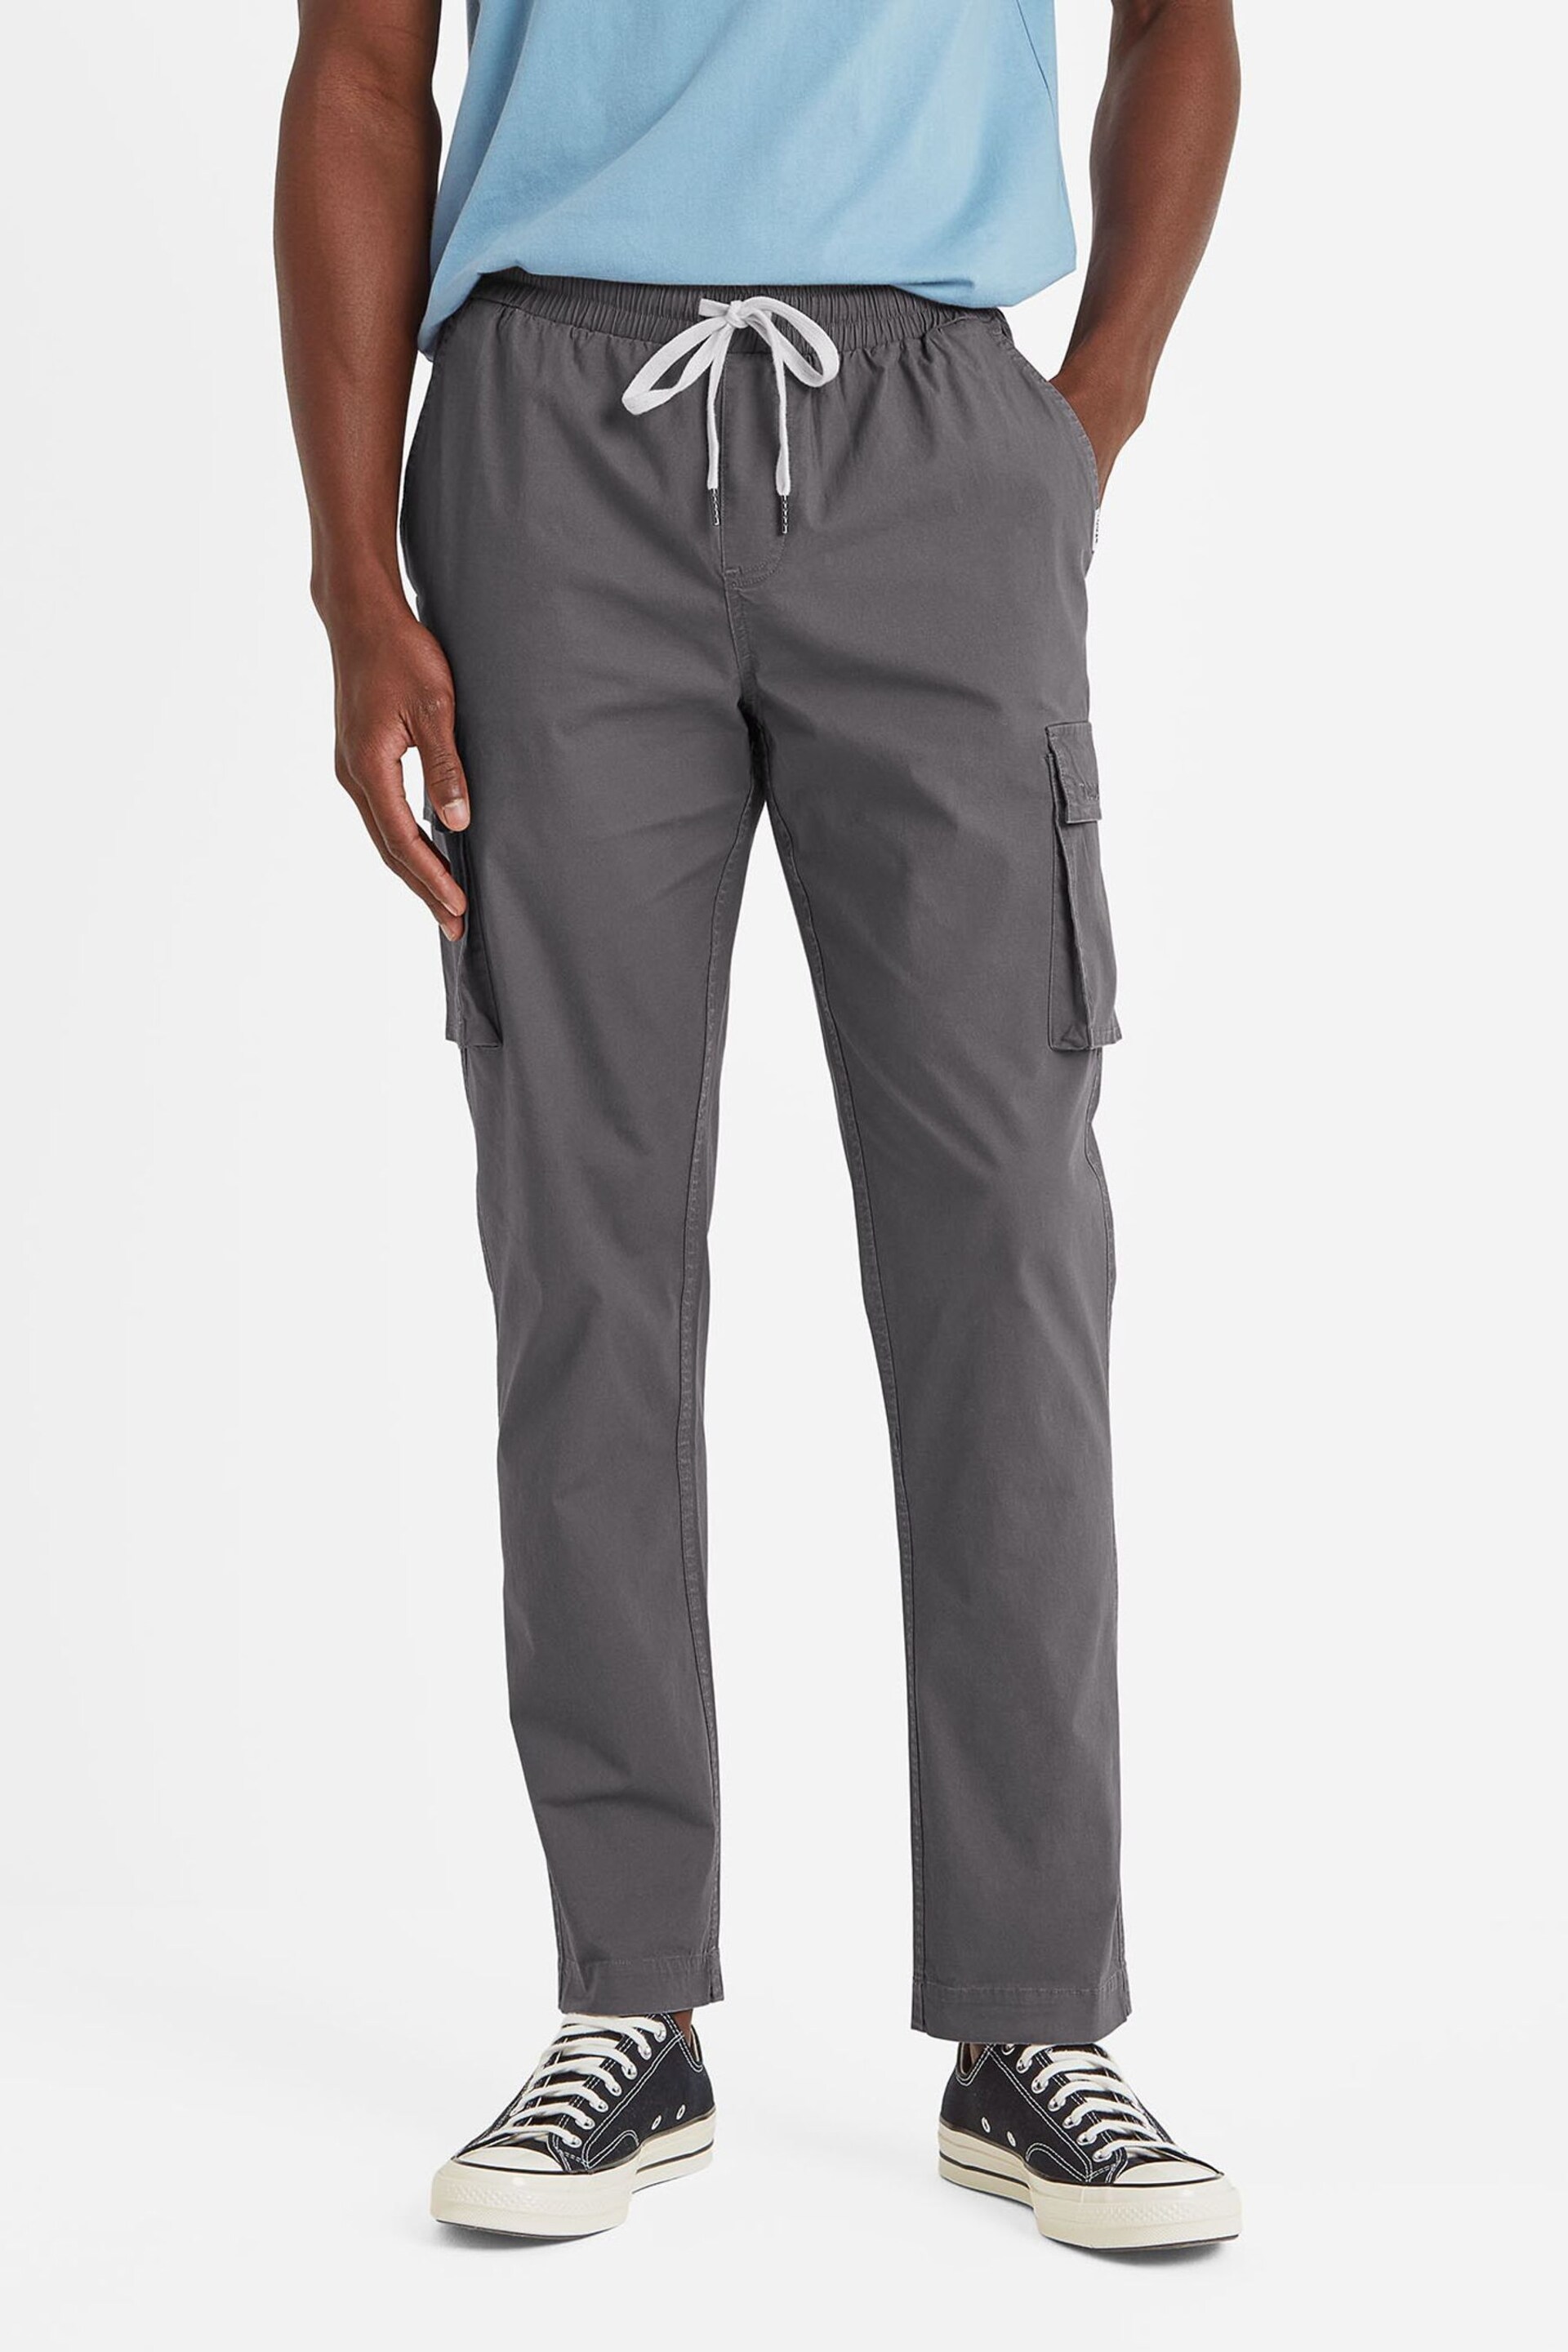 Tog 24 Grey Silas Cargo Trousers - Image 1 of 5